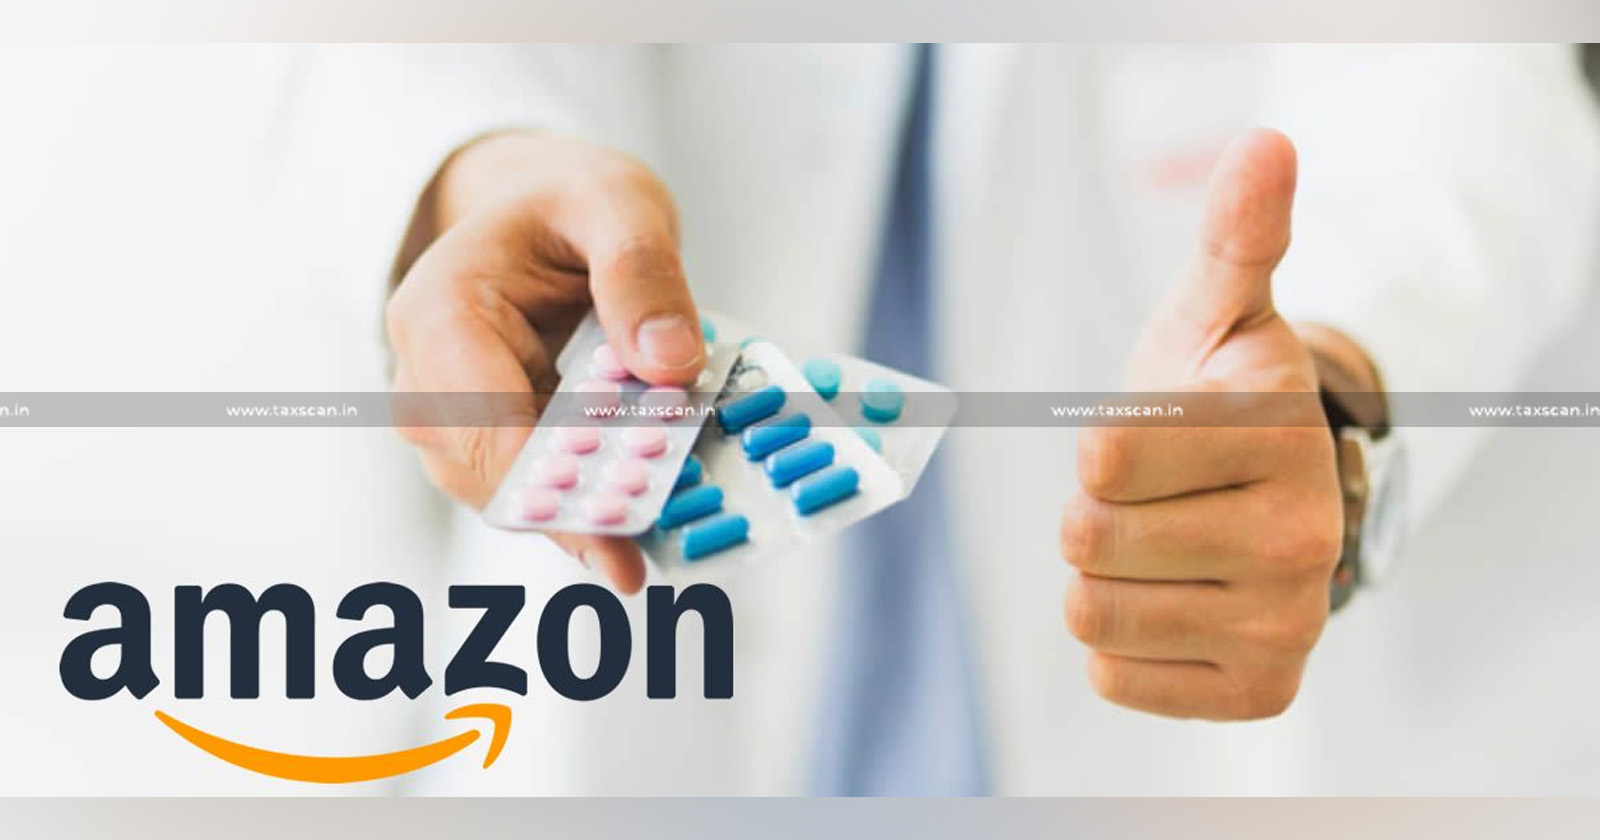 Value of Free Samples - Central Excise Valuation Rules - CESTAT - CESTAT Dismisses Appeal of Amazon Drugs Pvt Ltd - Amazon Drugs Pvt Ltd - Appeal of Amazon Drugs Pvt Ltd - Central Excise - Taxscan